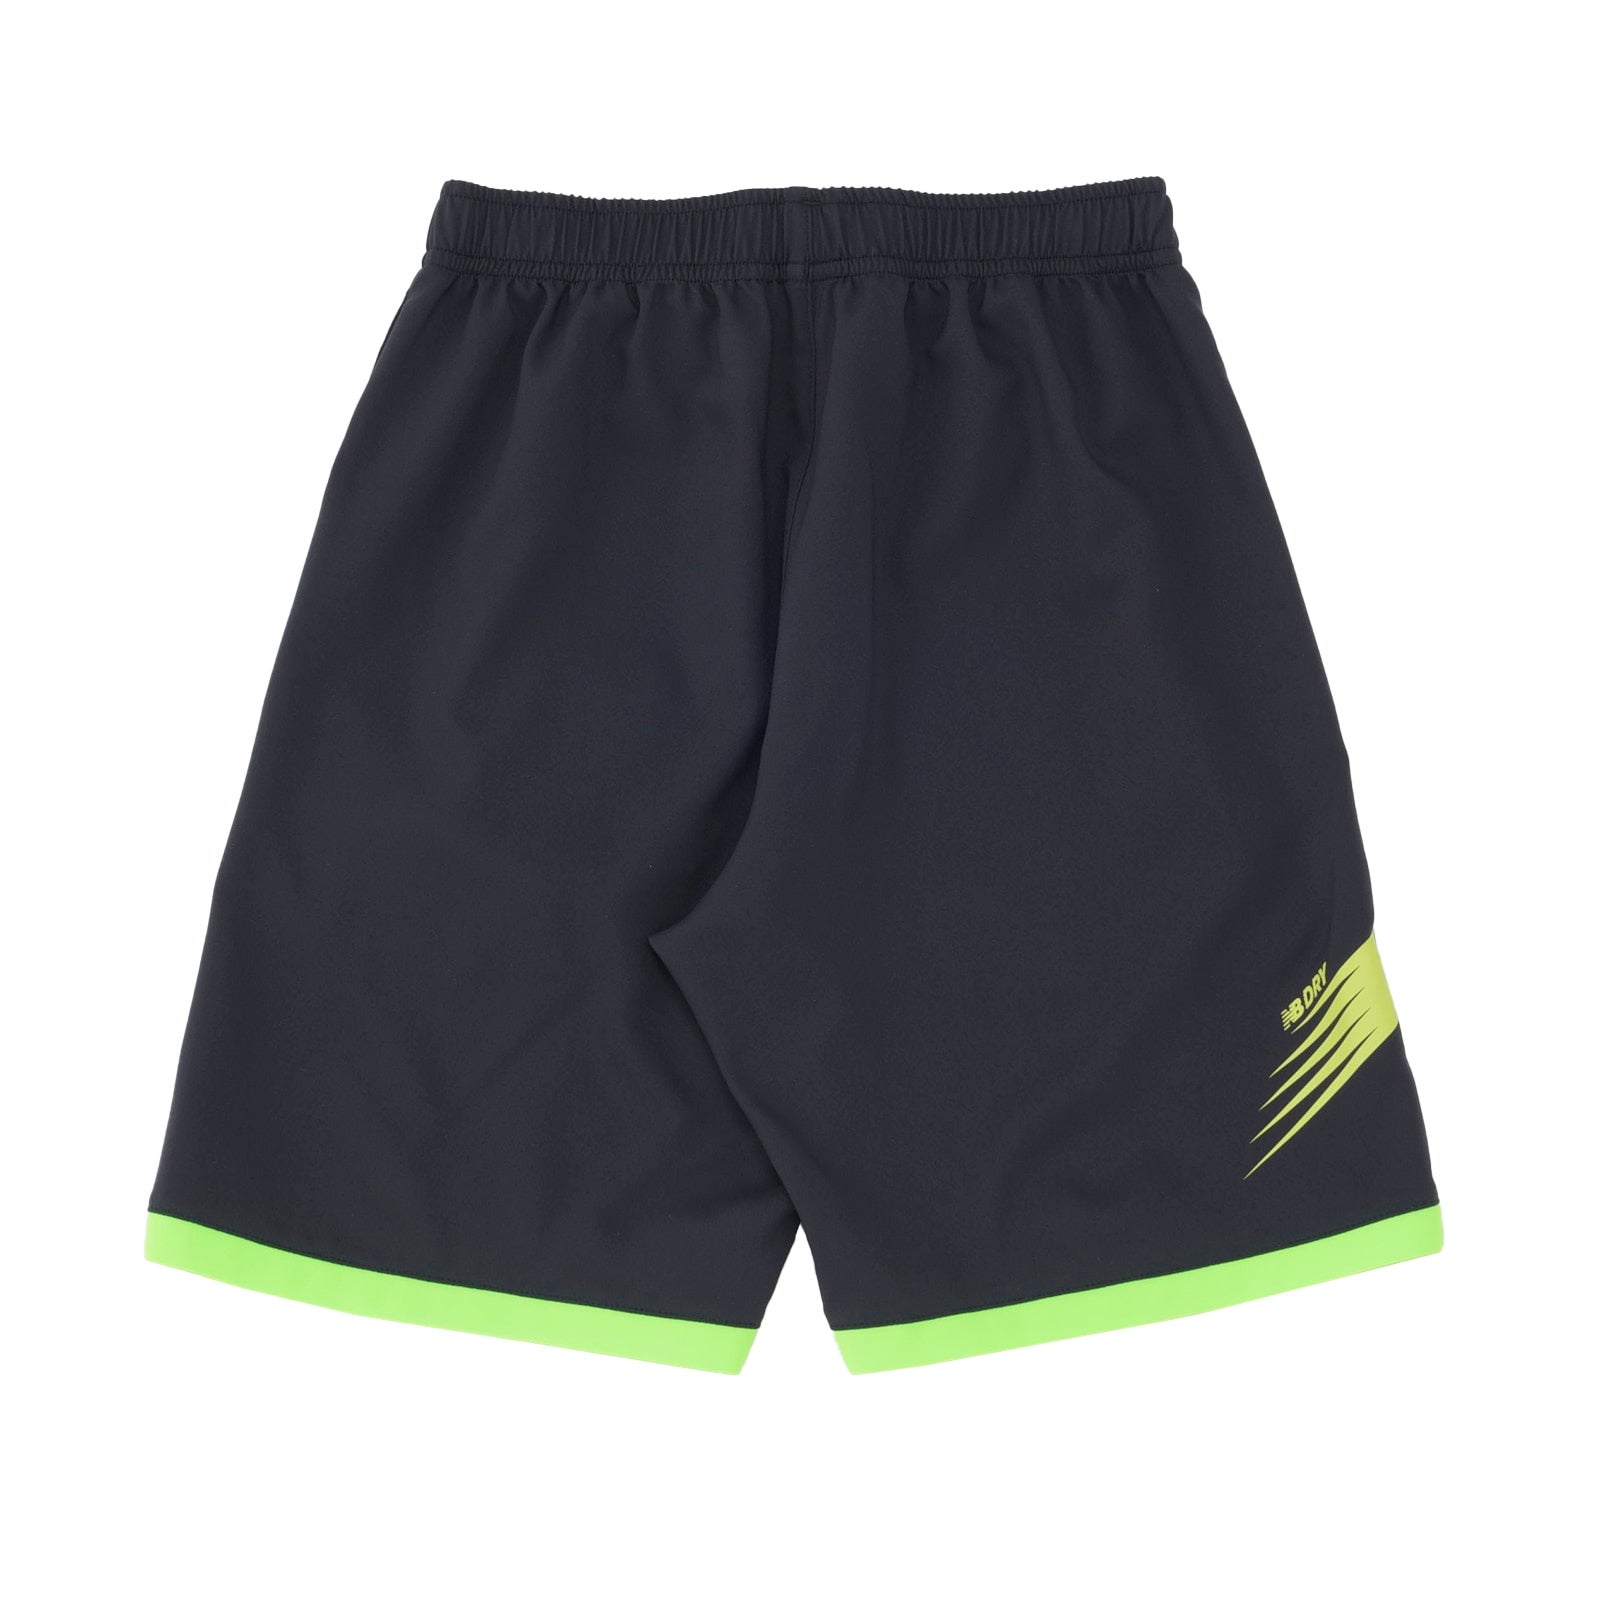 Junior practice stretch woven shorts with pockets